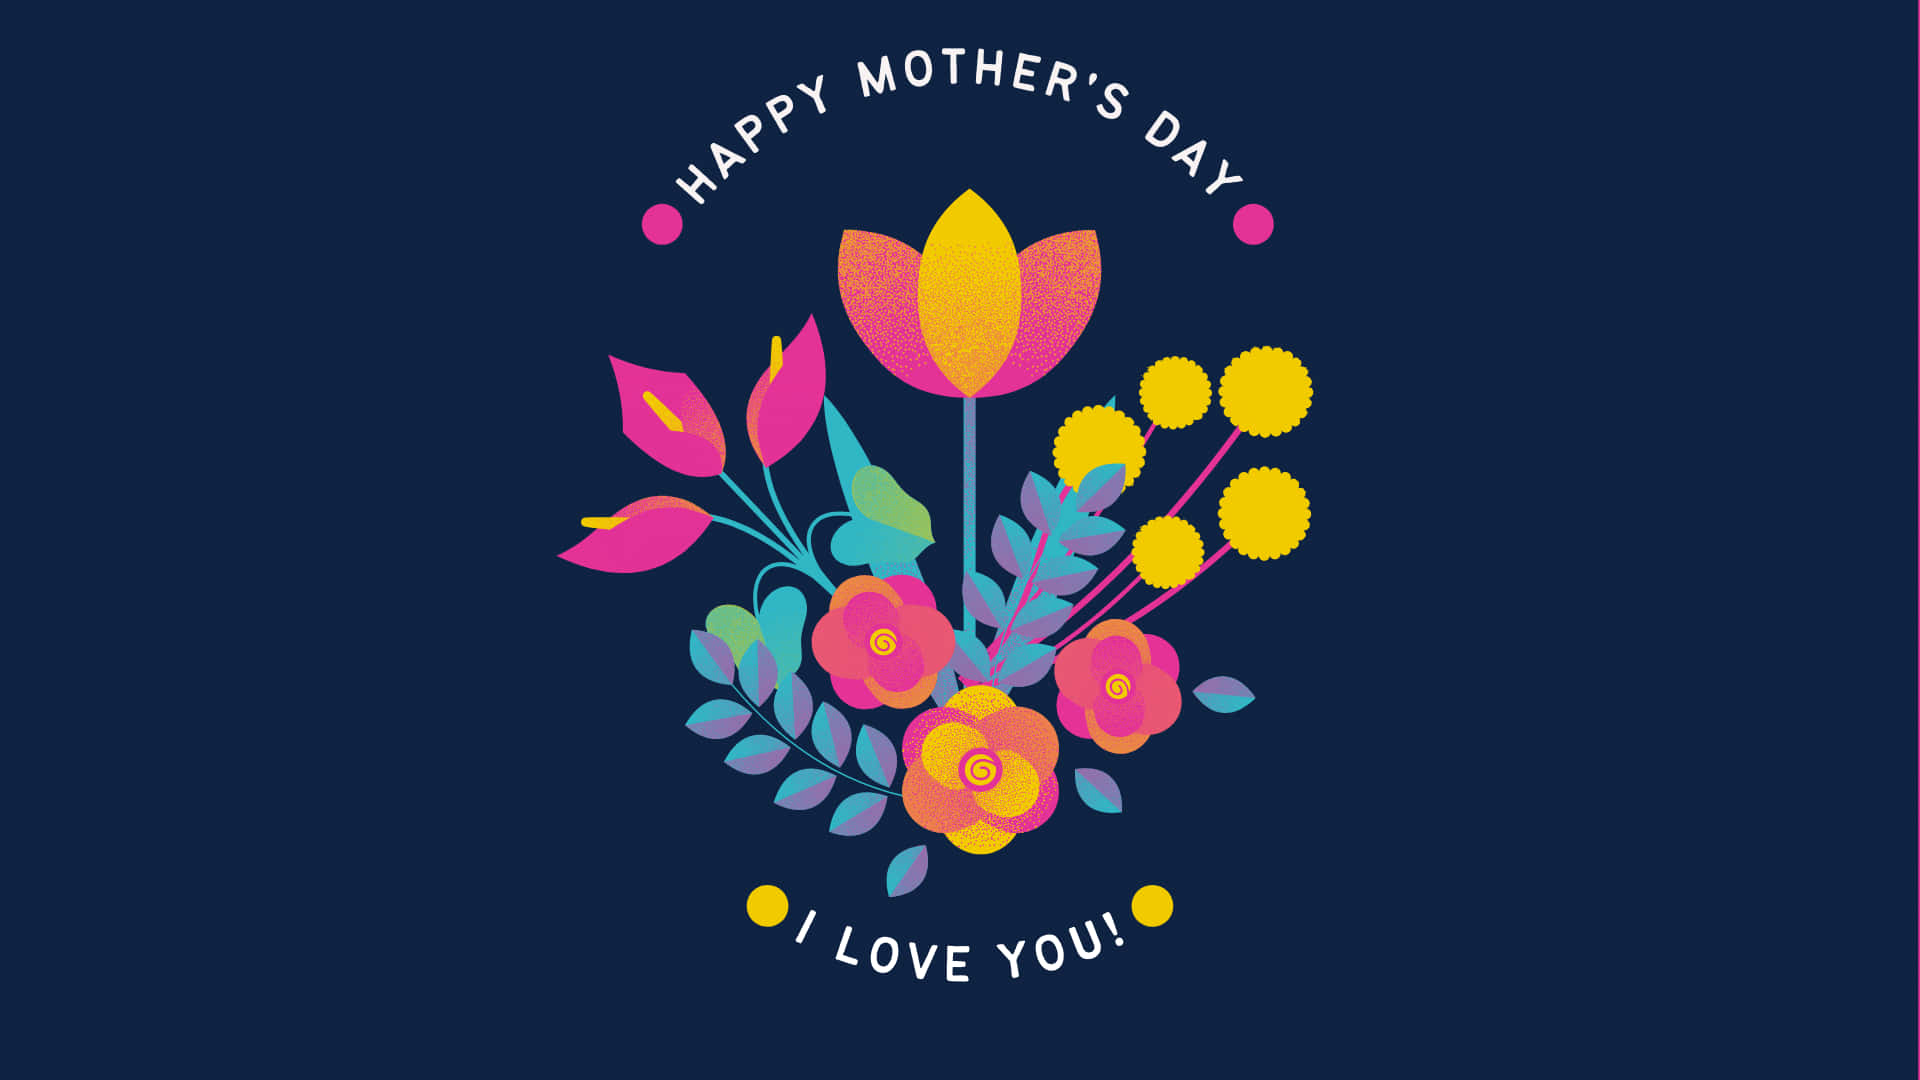 Celebrate This Mother's Day With Love!